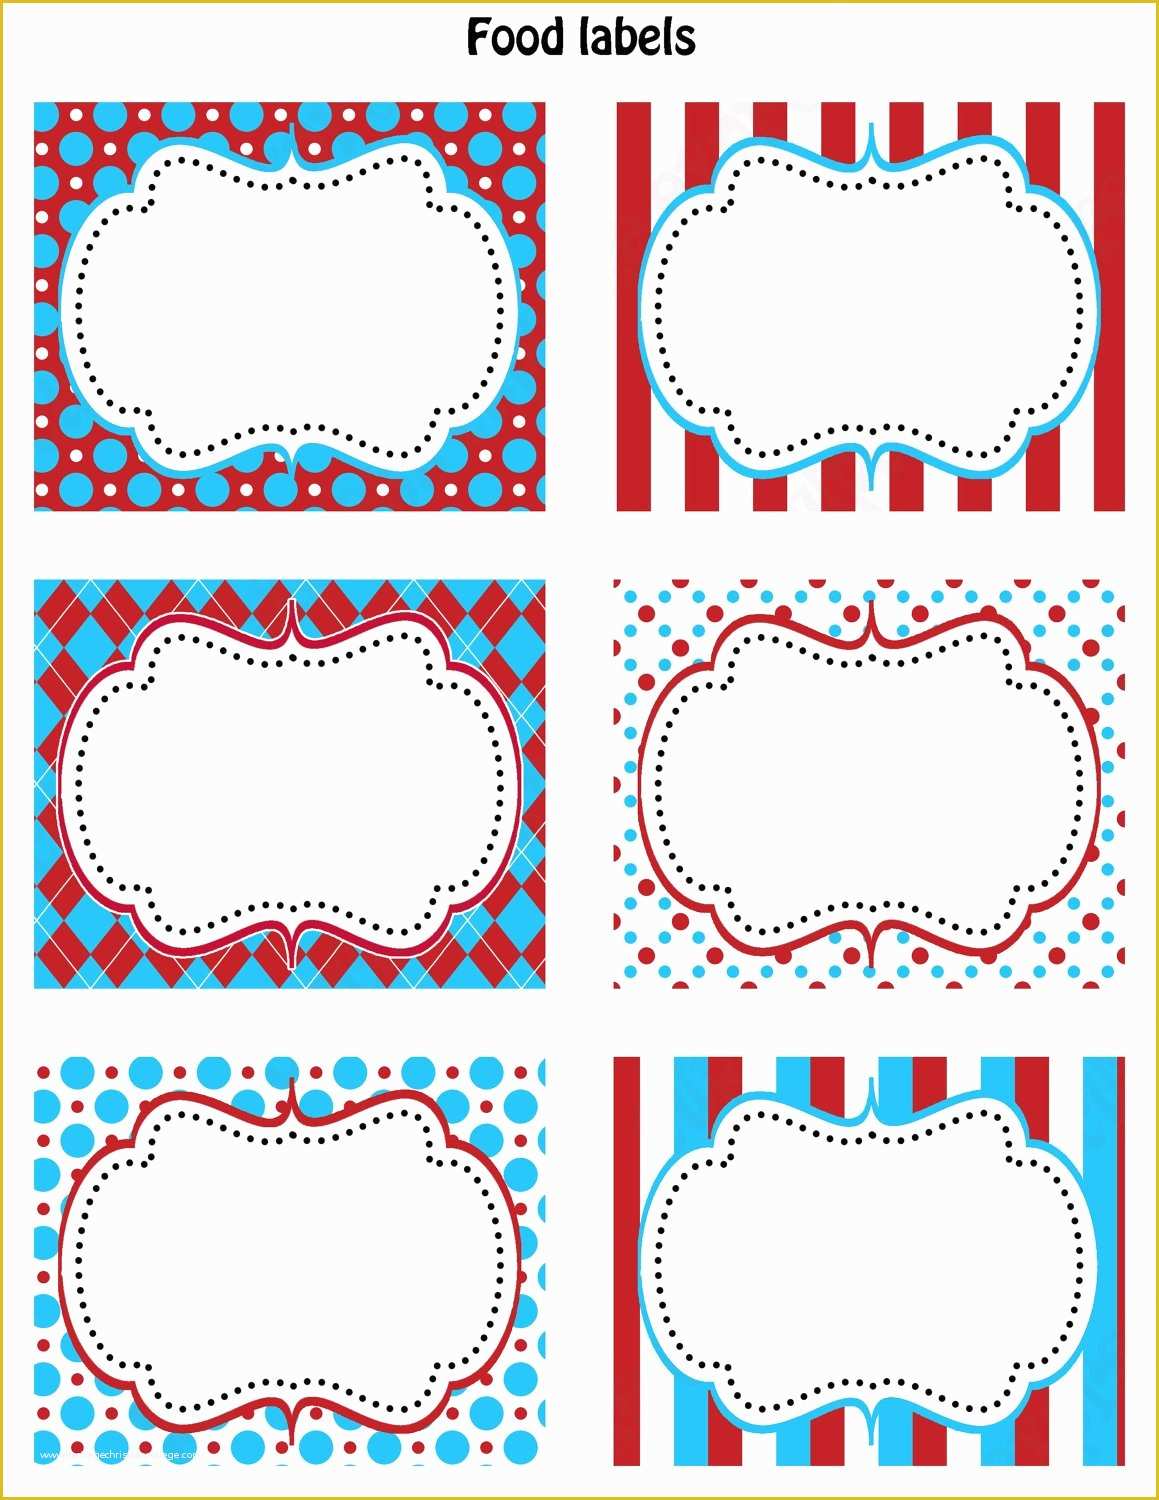 free-printable-food-labels-templates-of-dr-seuss-inspired-1st-birthday